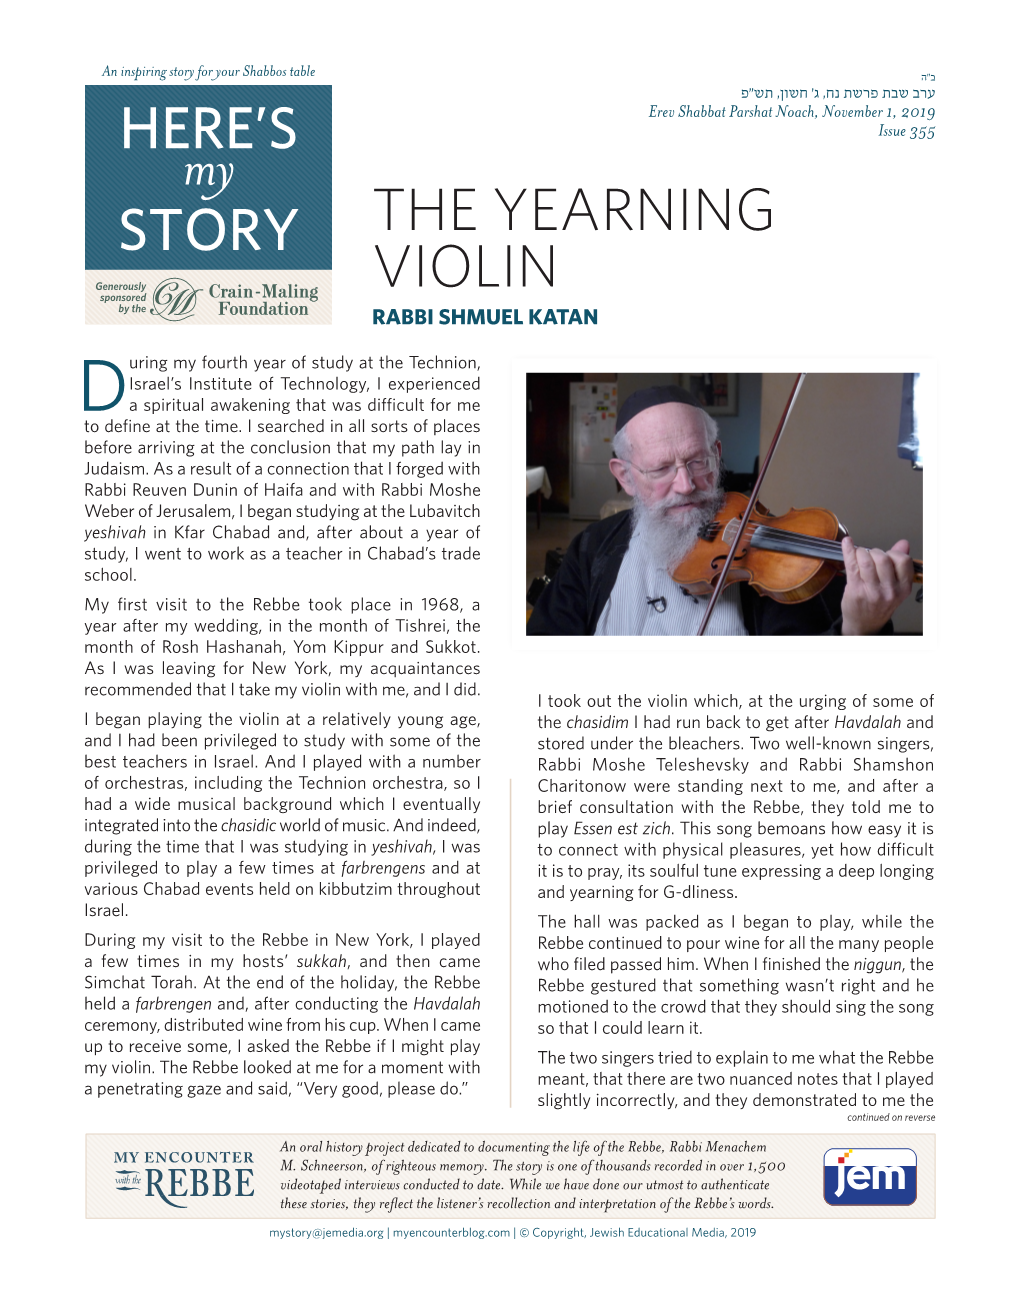 The Yearning Violin